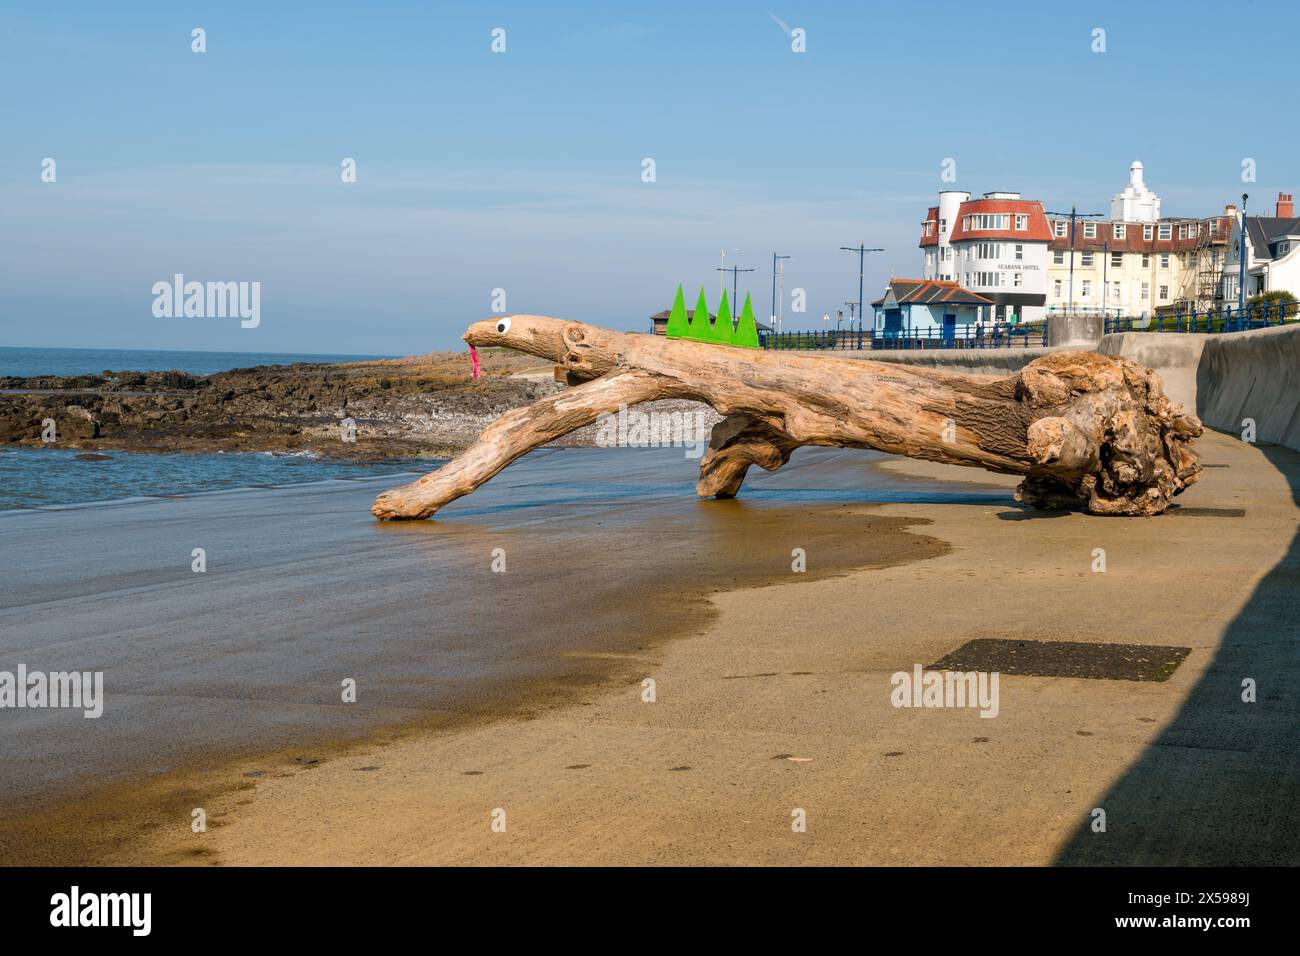 A Tree stump washed on the Porthcawl's seafront has been decorated as a lizard. Stock Photo